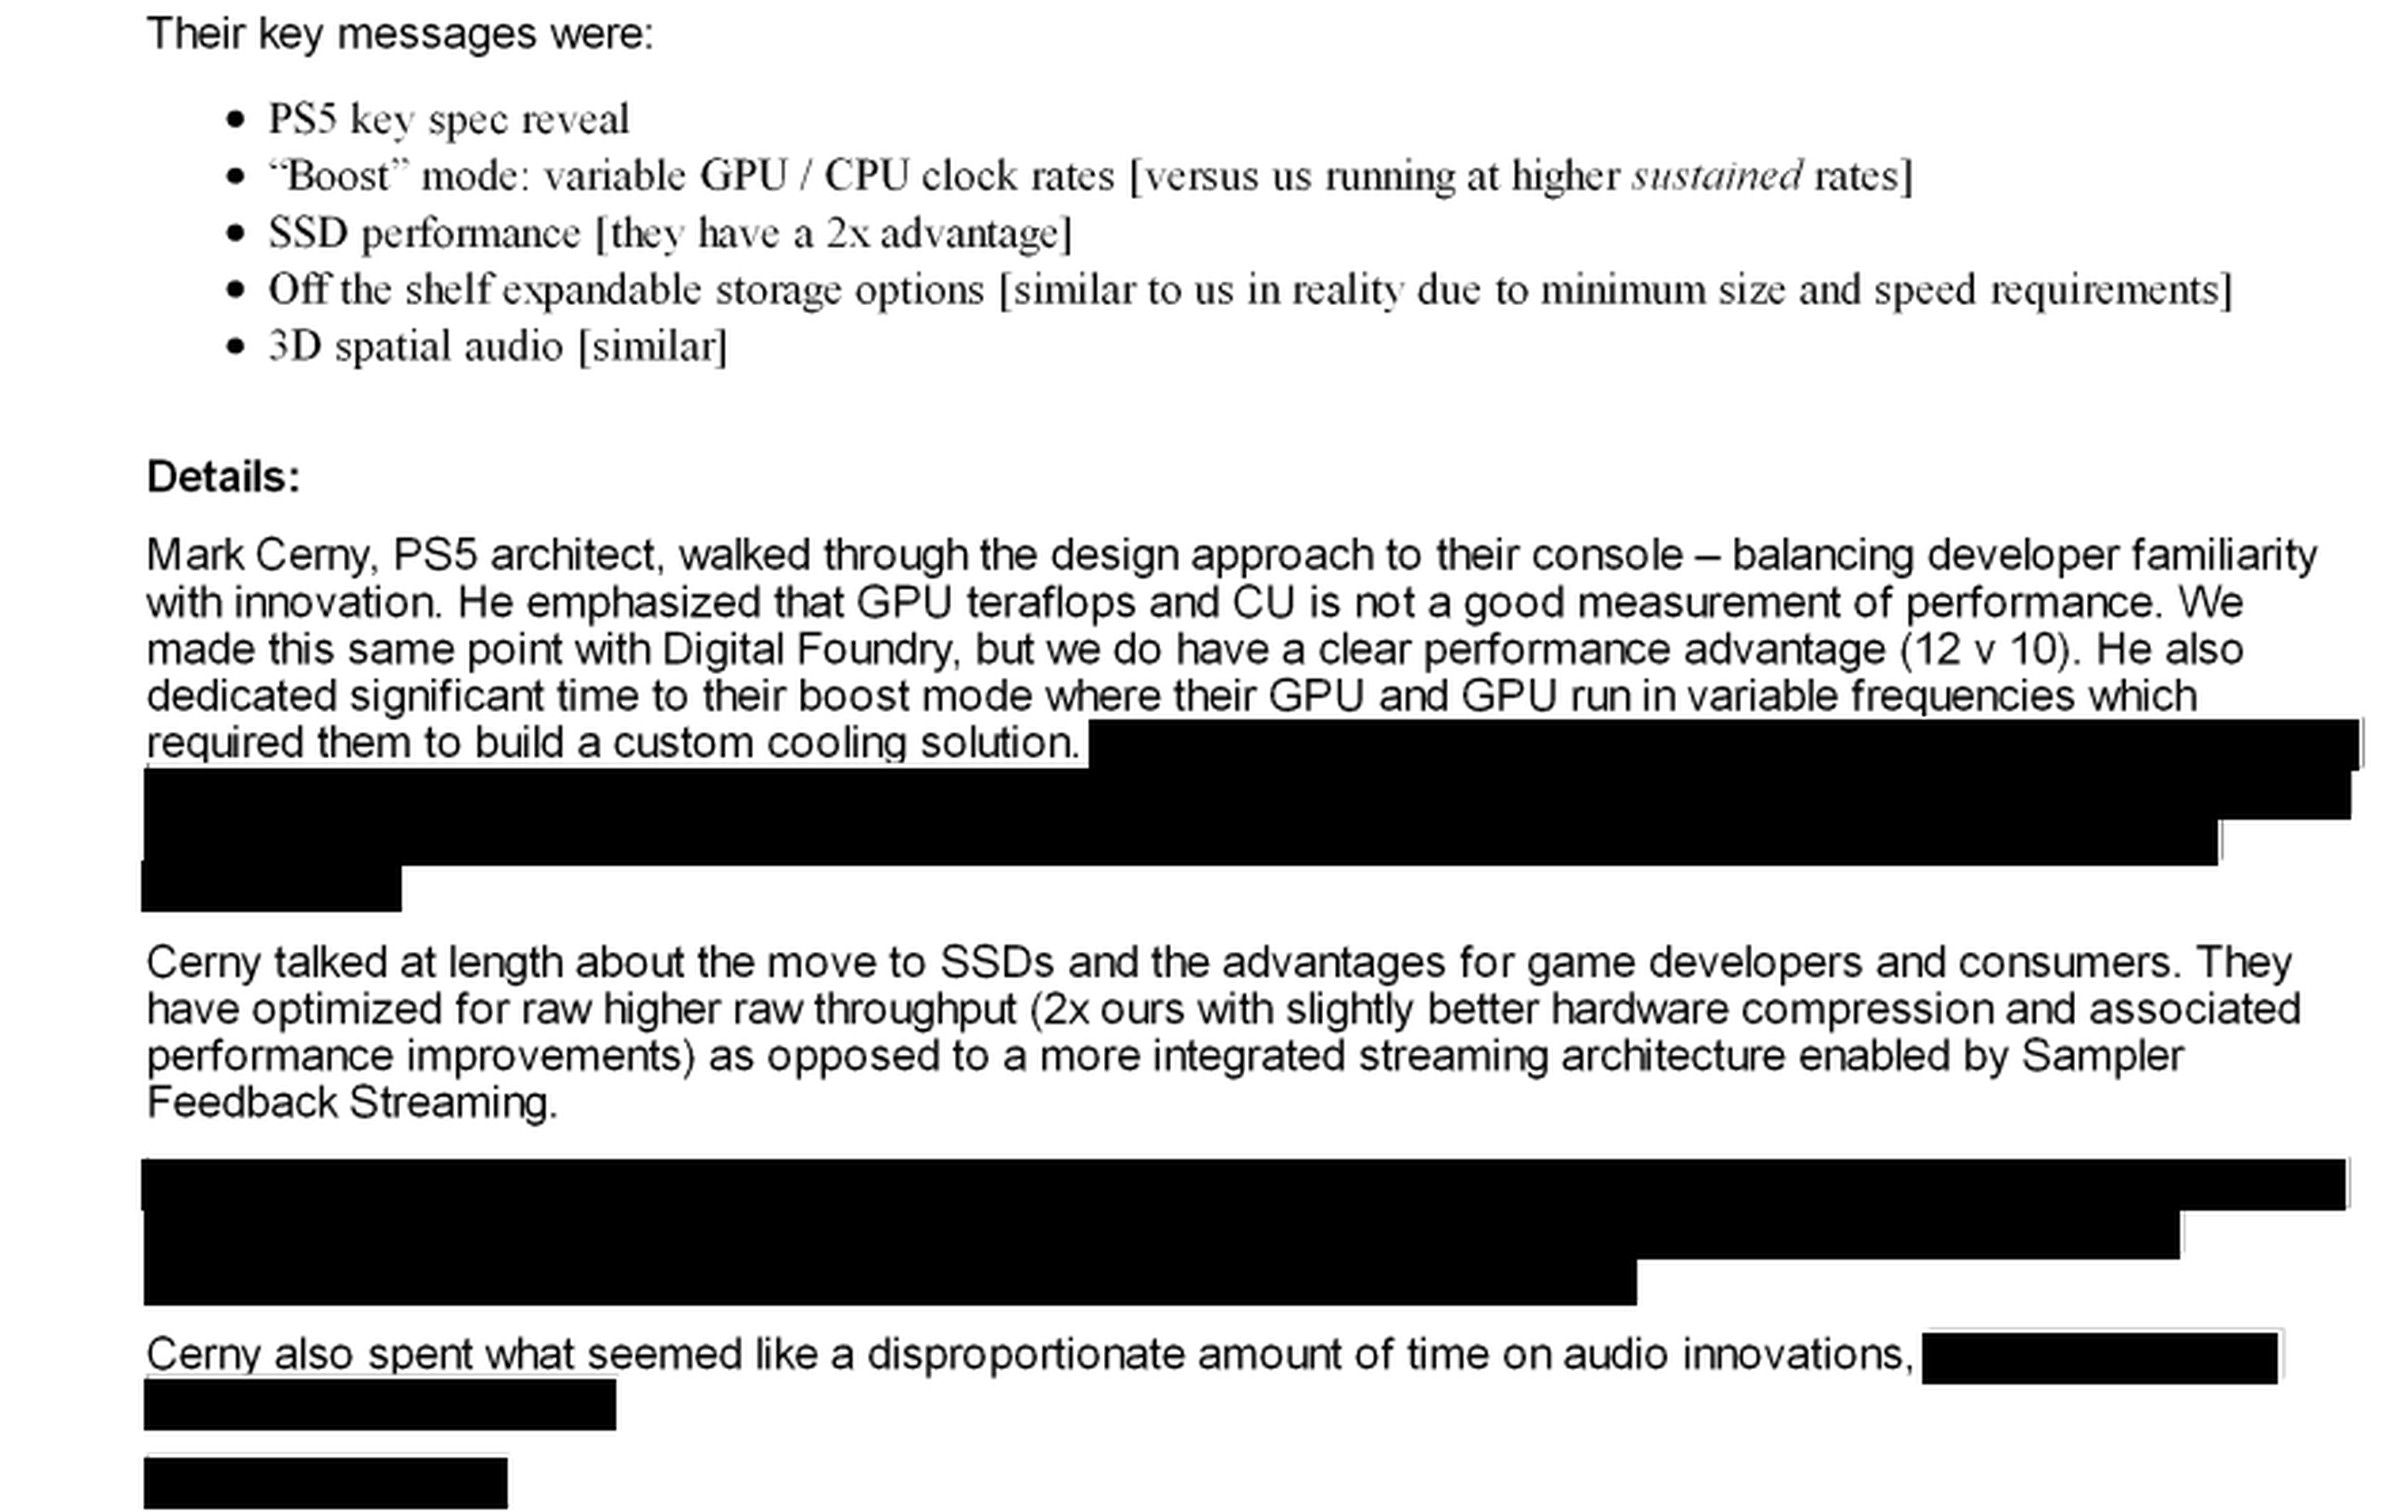 The heavily redacted PS5 reaction email.